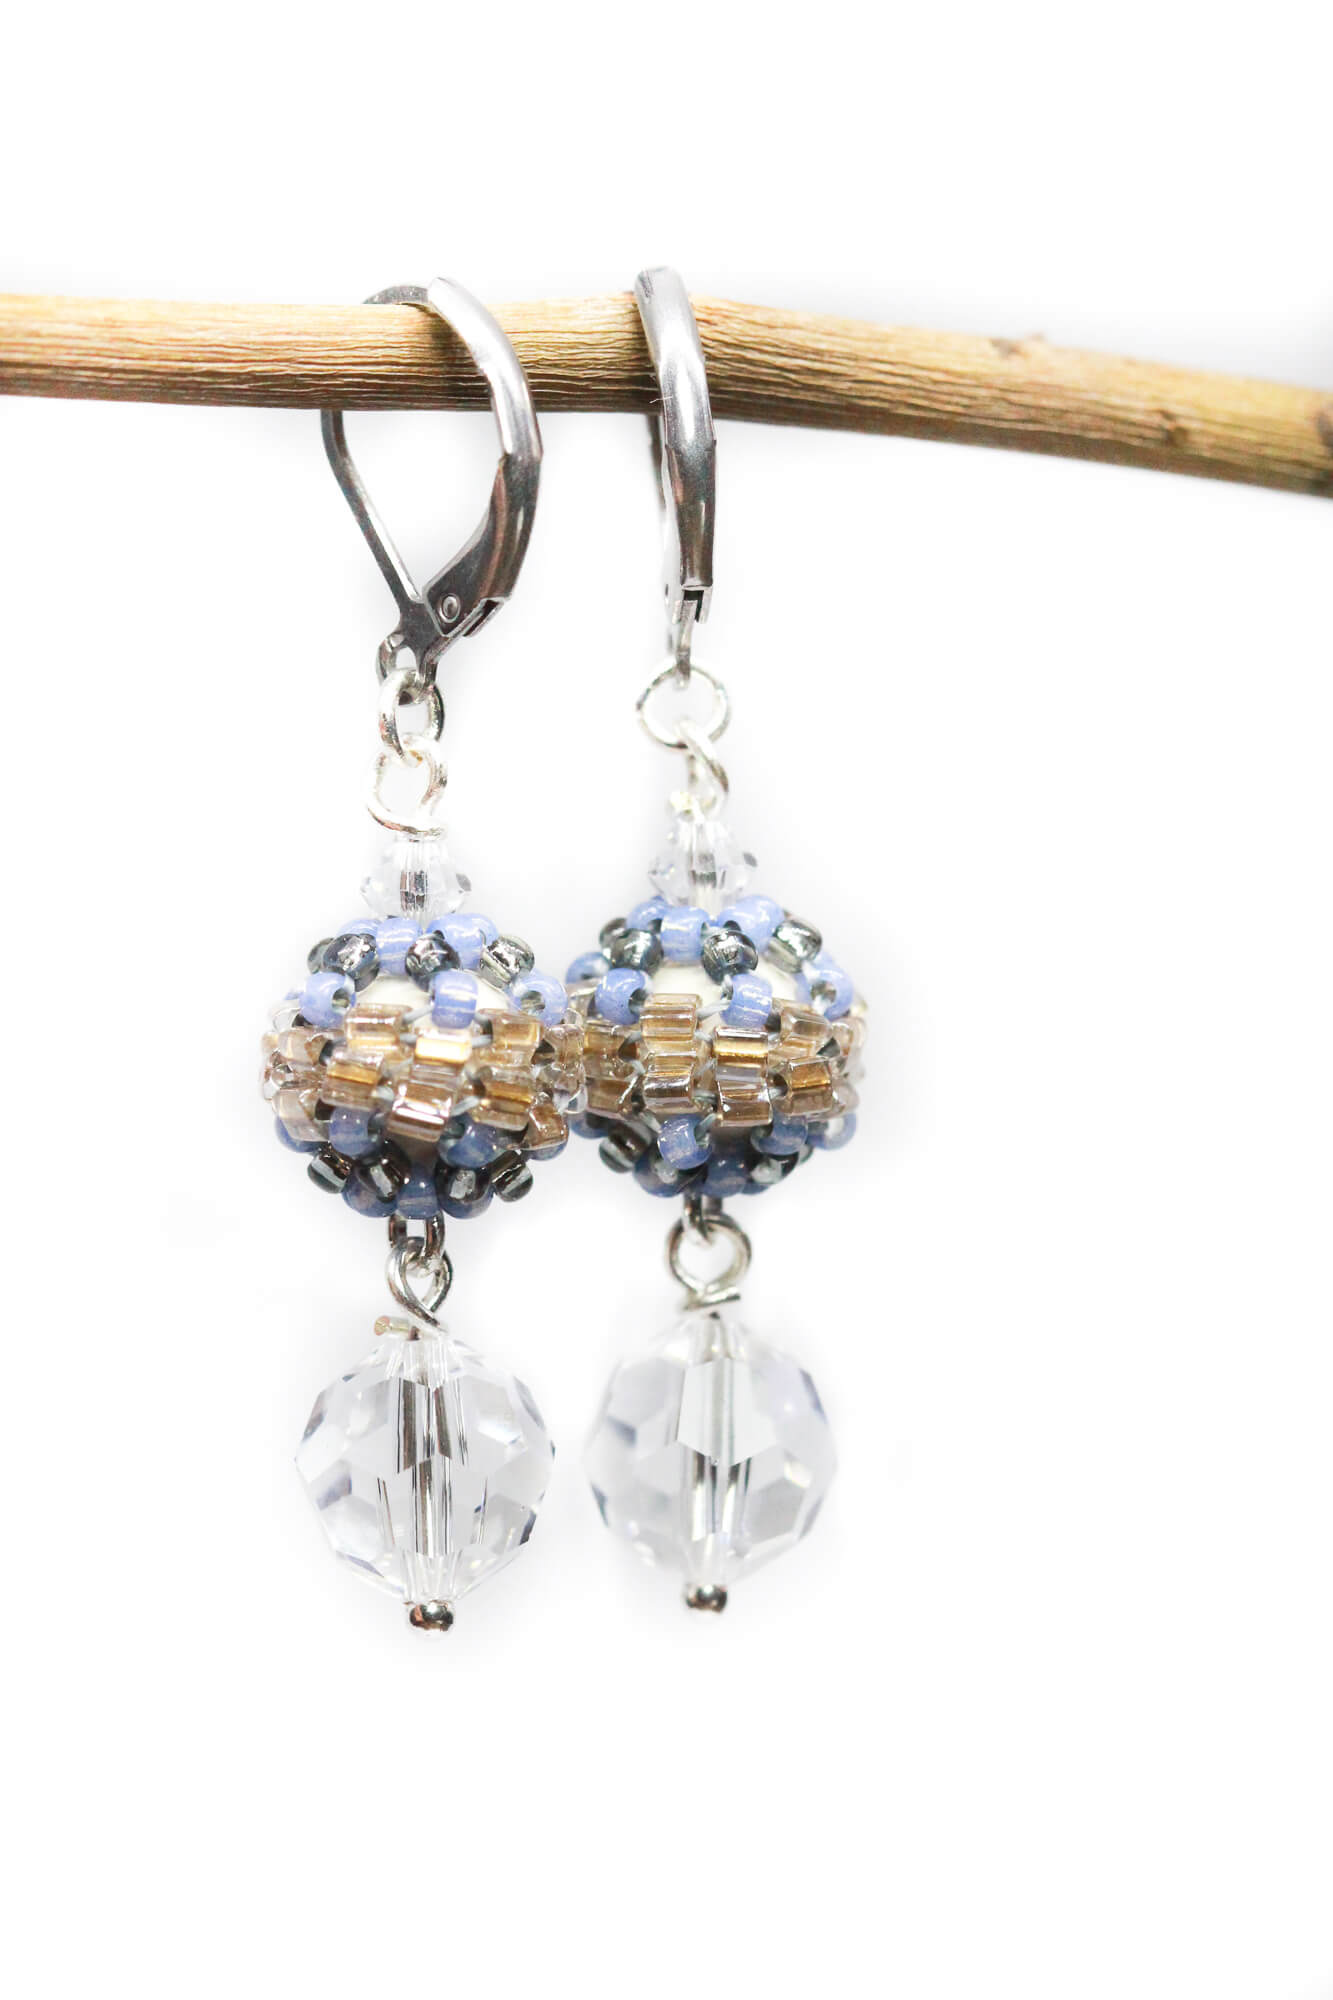 Elegant dangle and drop earrings that will pair brilliantly with any work outfit and seamlessly transition into evening wear. #dangleanddropearrings #dropearrings #dangleearrings #designerearrings